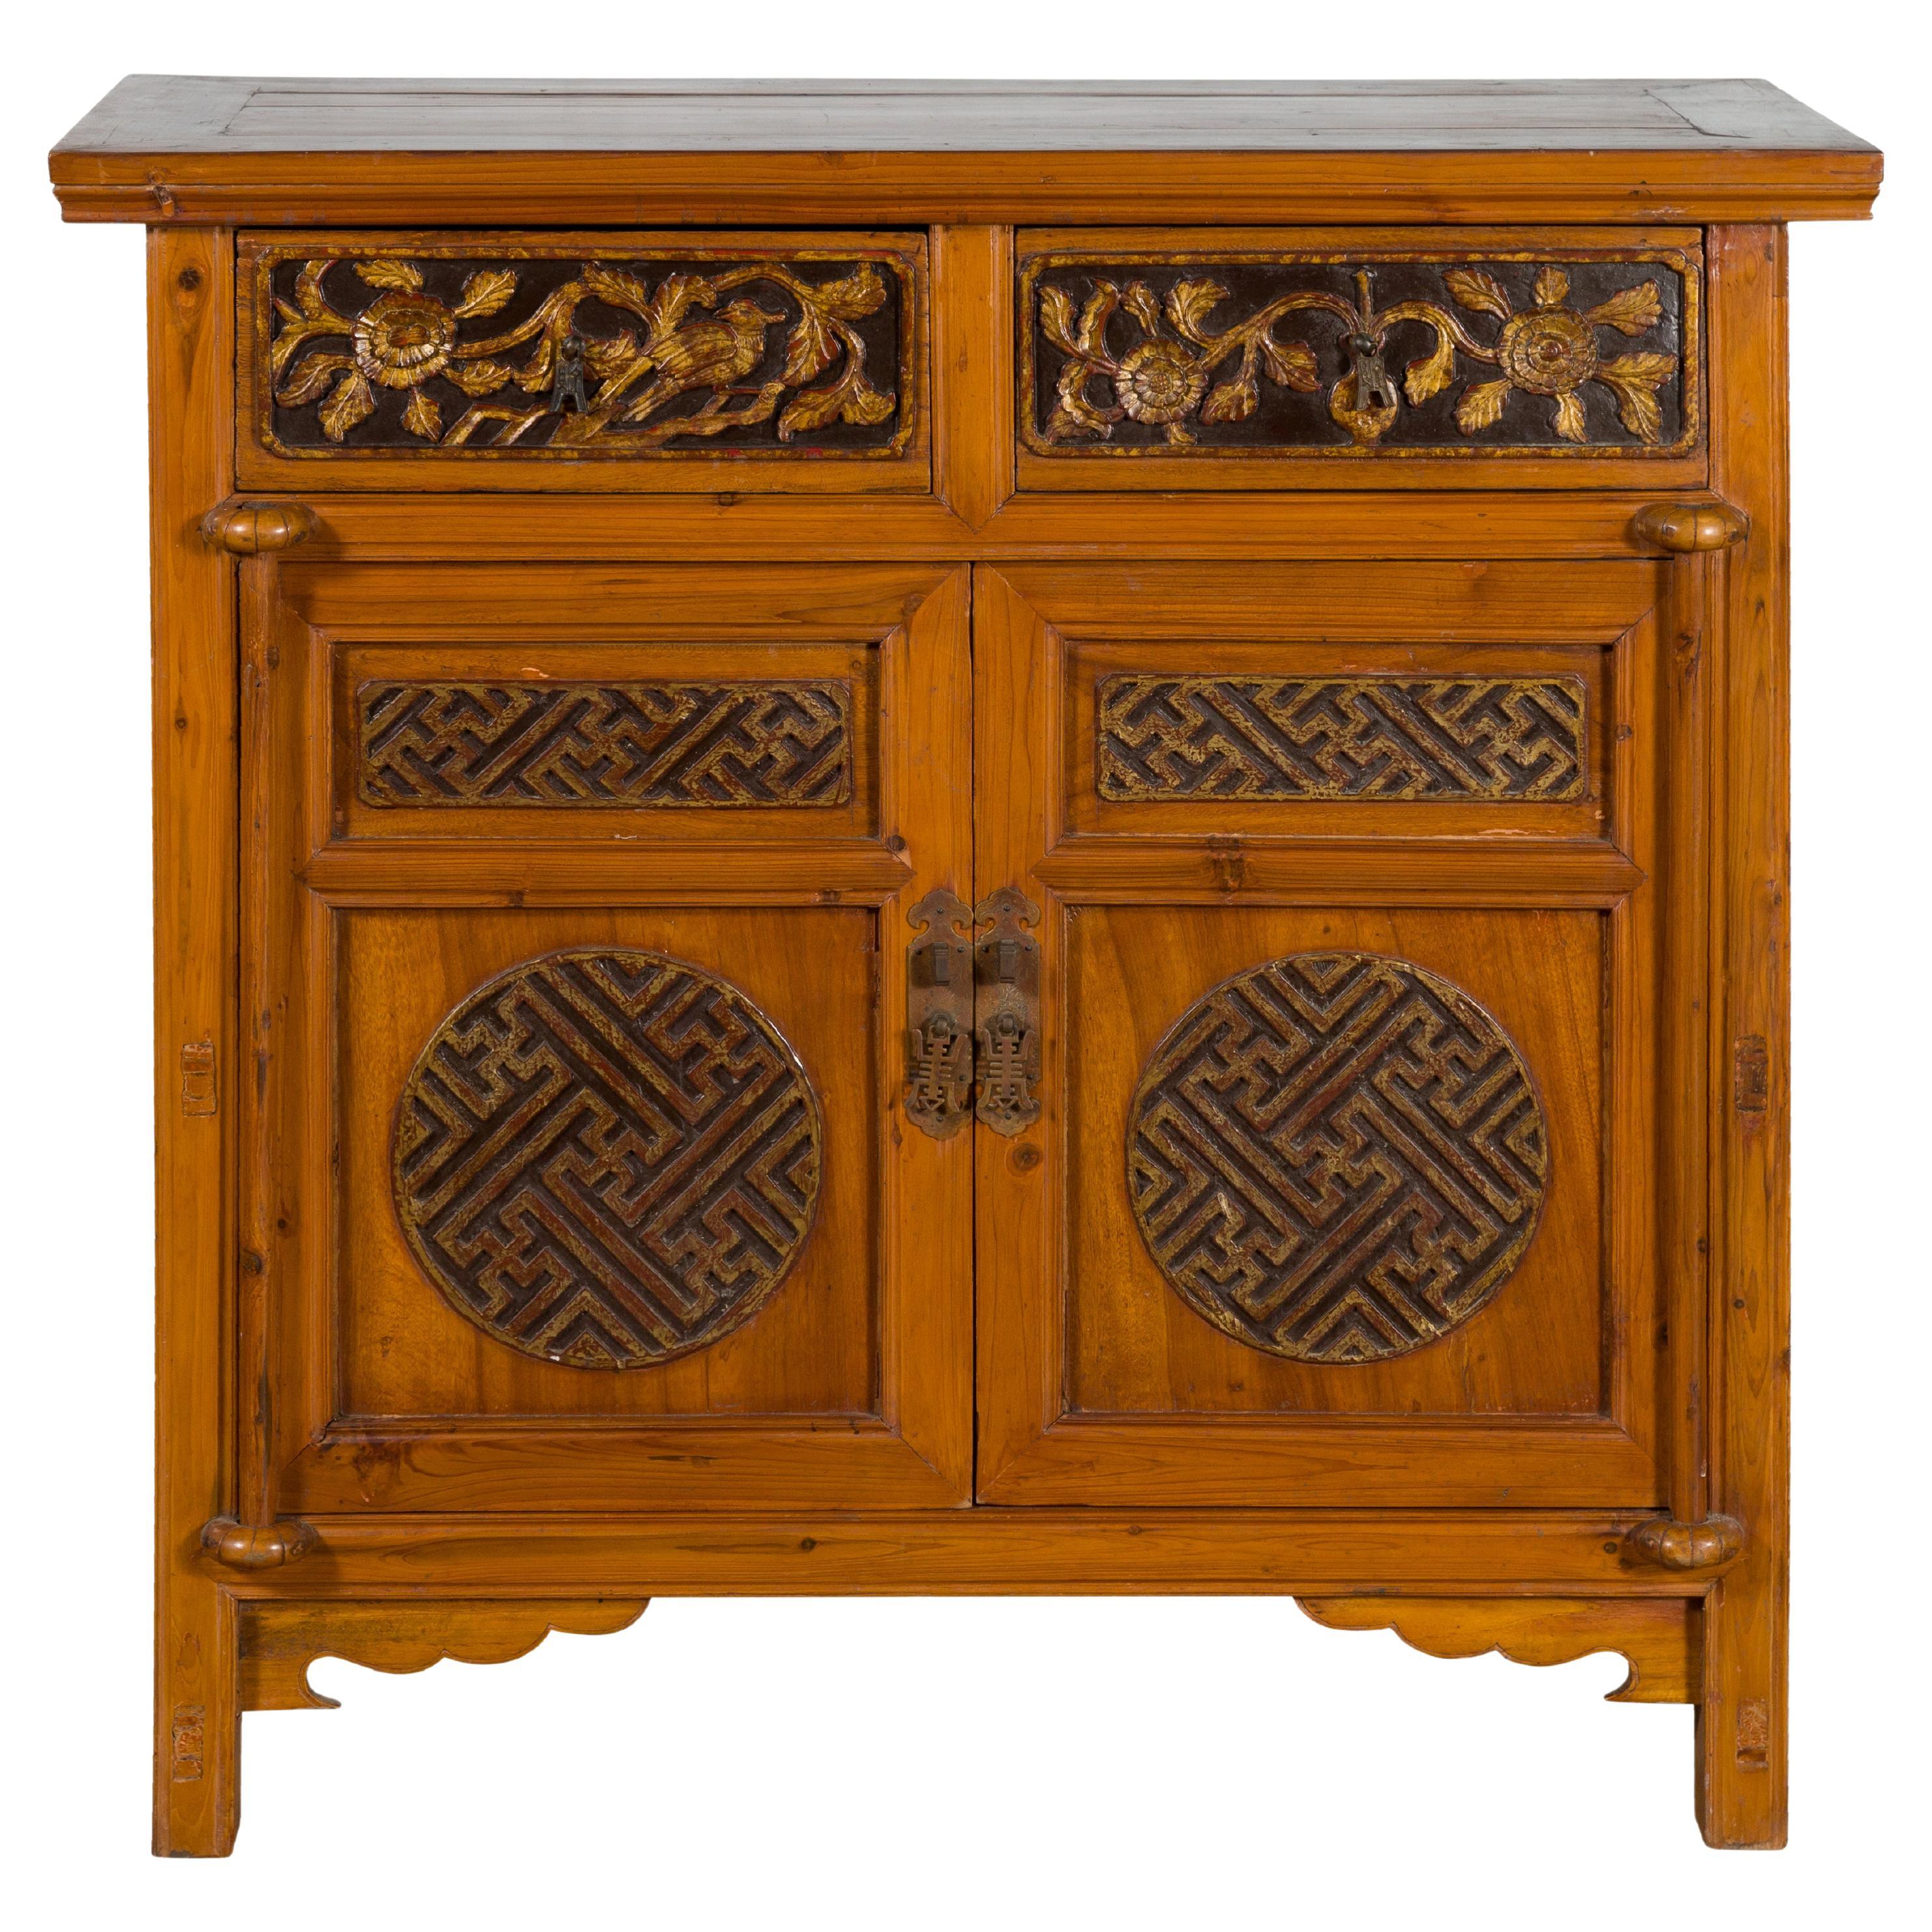 Chinese Qing Dynasty 19th Century Side Cabinet with Fretwork and Carved Drawers